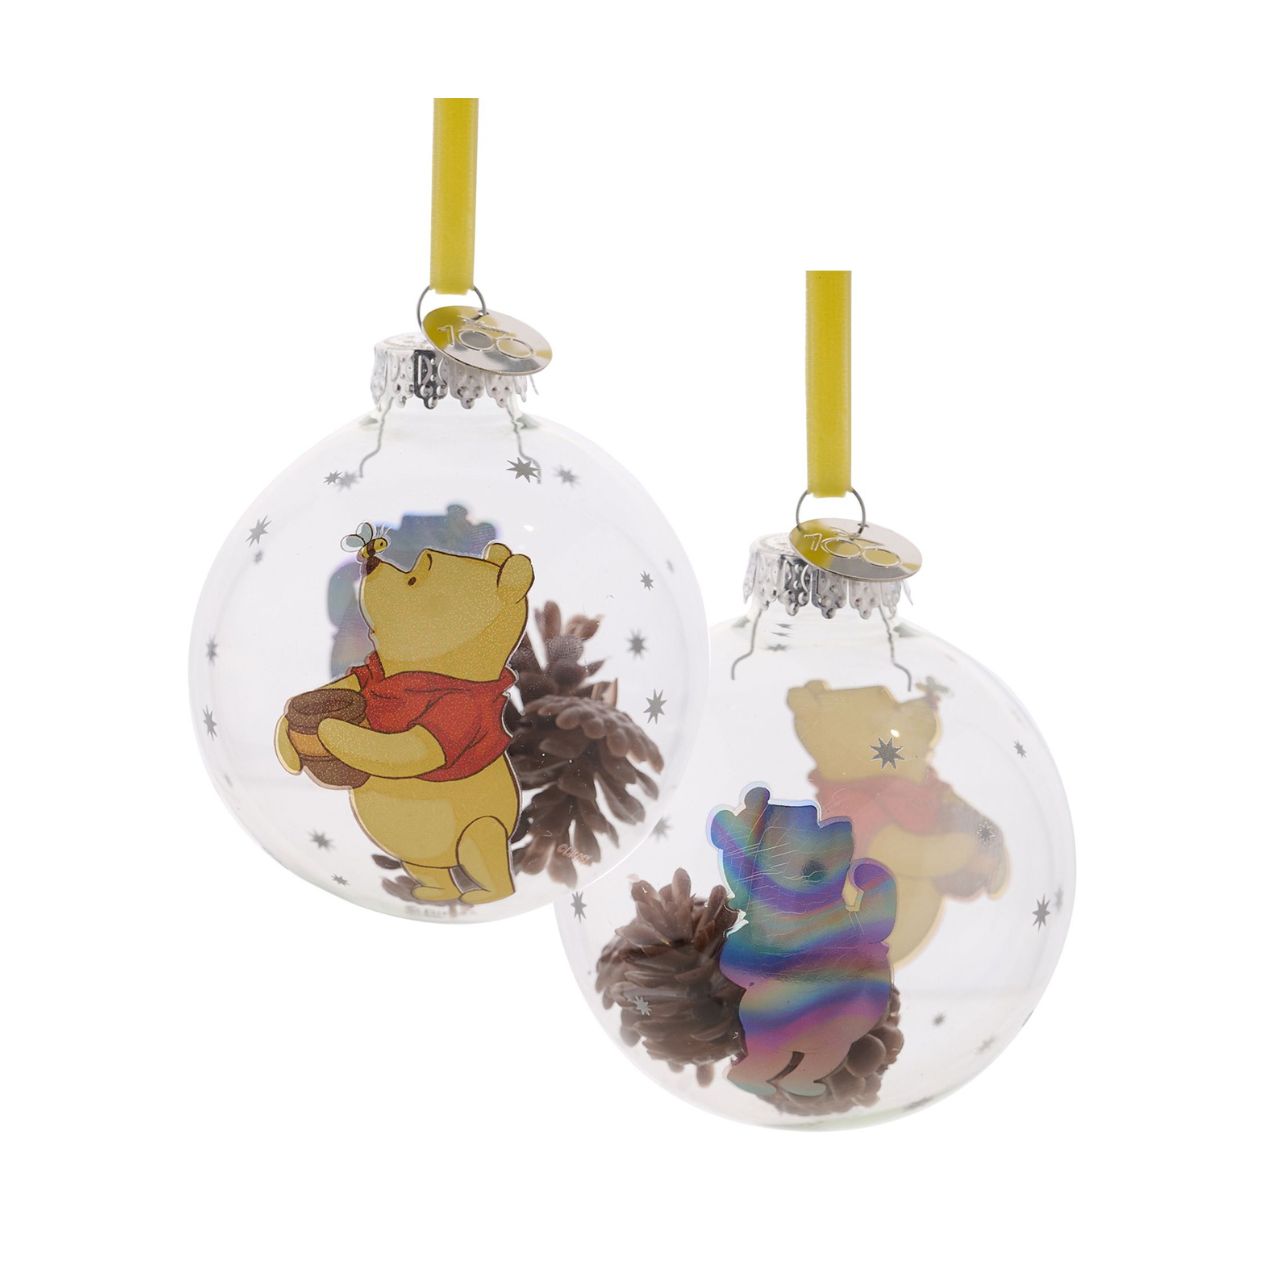 Disney Limited Edition 100 Christmas Bauble - Winnie  A Winnie the Pooh glass bauble from Disney 100 by DISNEY®.  This limited edition tree decoration captures the true magic of Disney on its centenary and can be enjoyed by fans of all ages at Christmas.